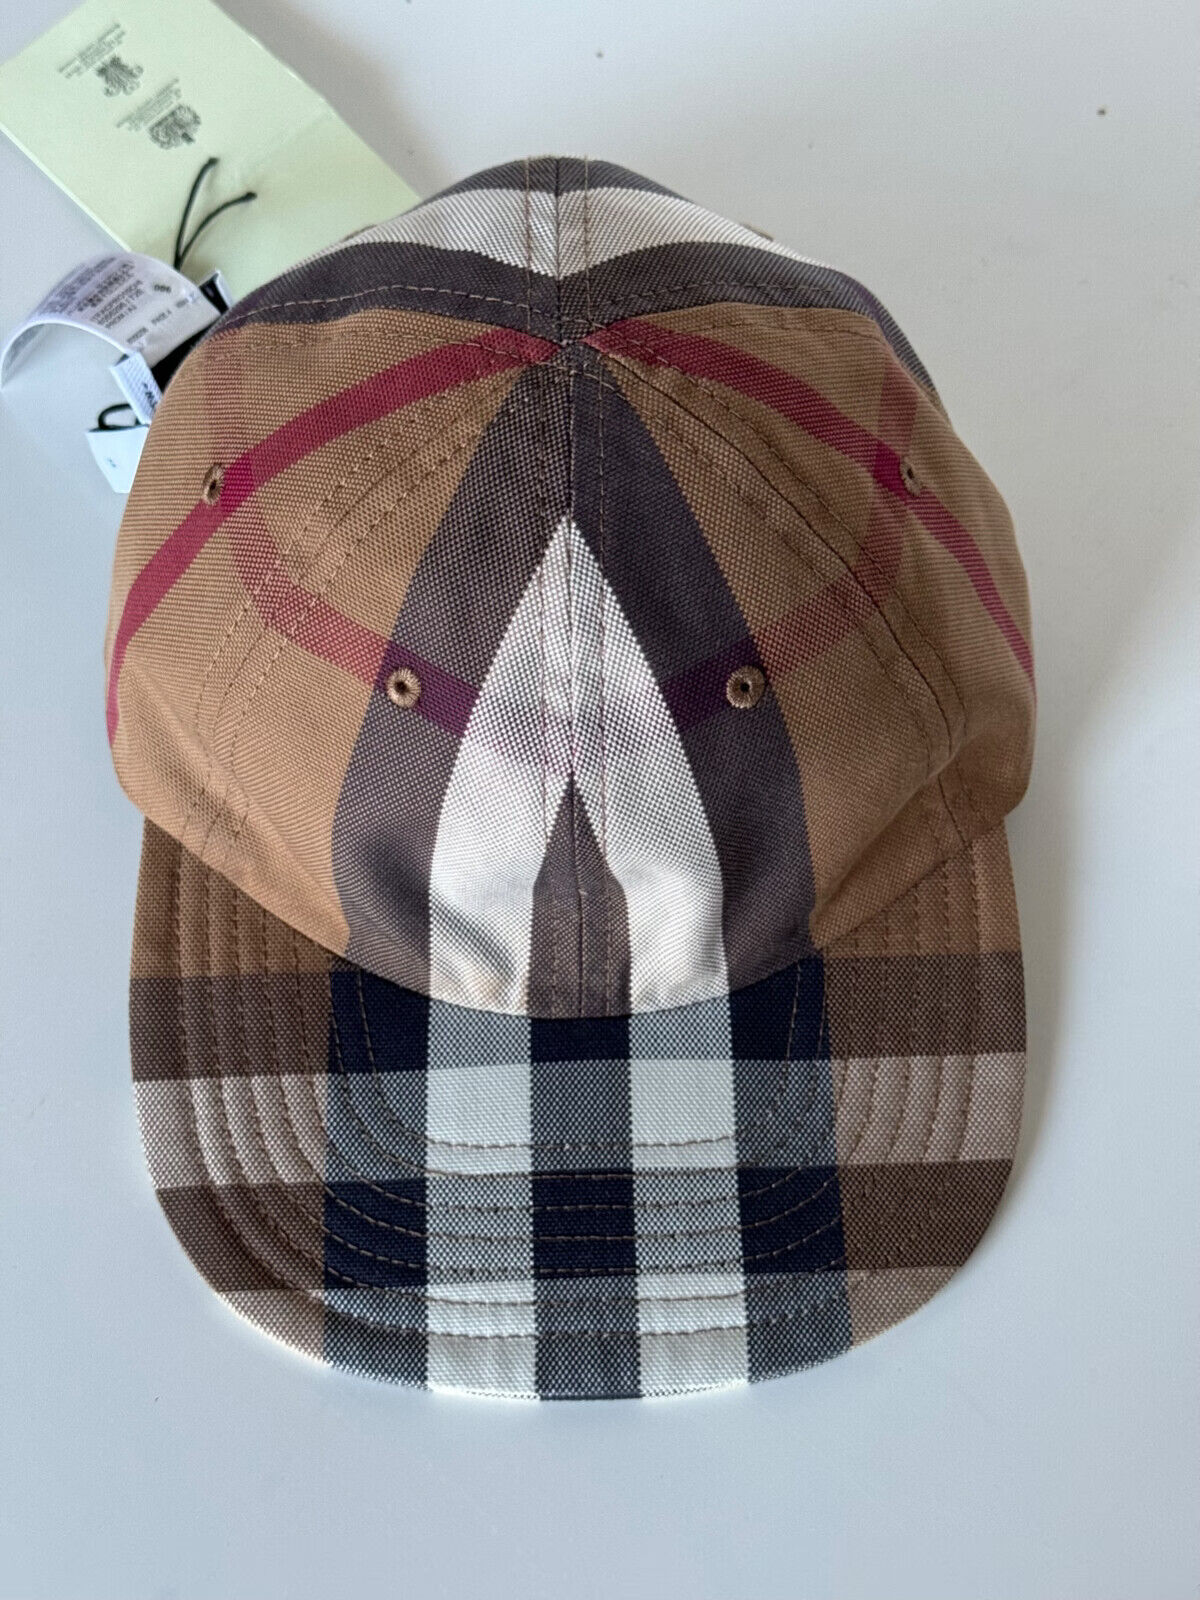 NWT $440 Burberry Reversible Baseball Cap Archive Beige L (59 cm) 8056296 Italy